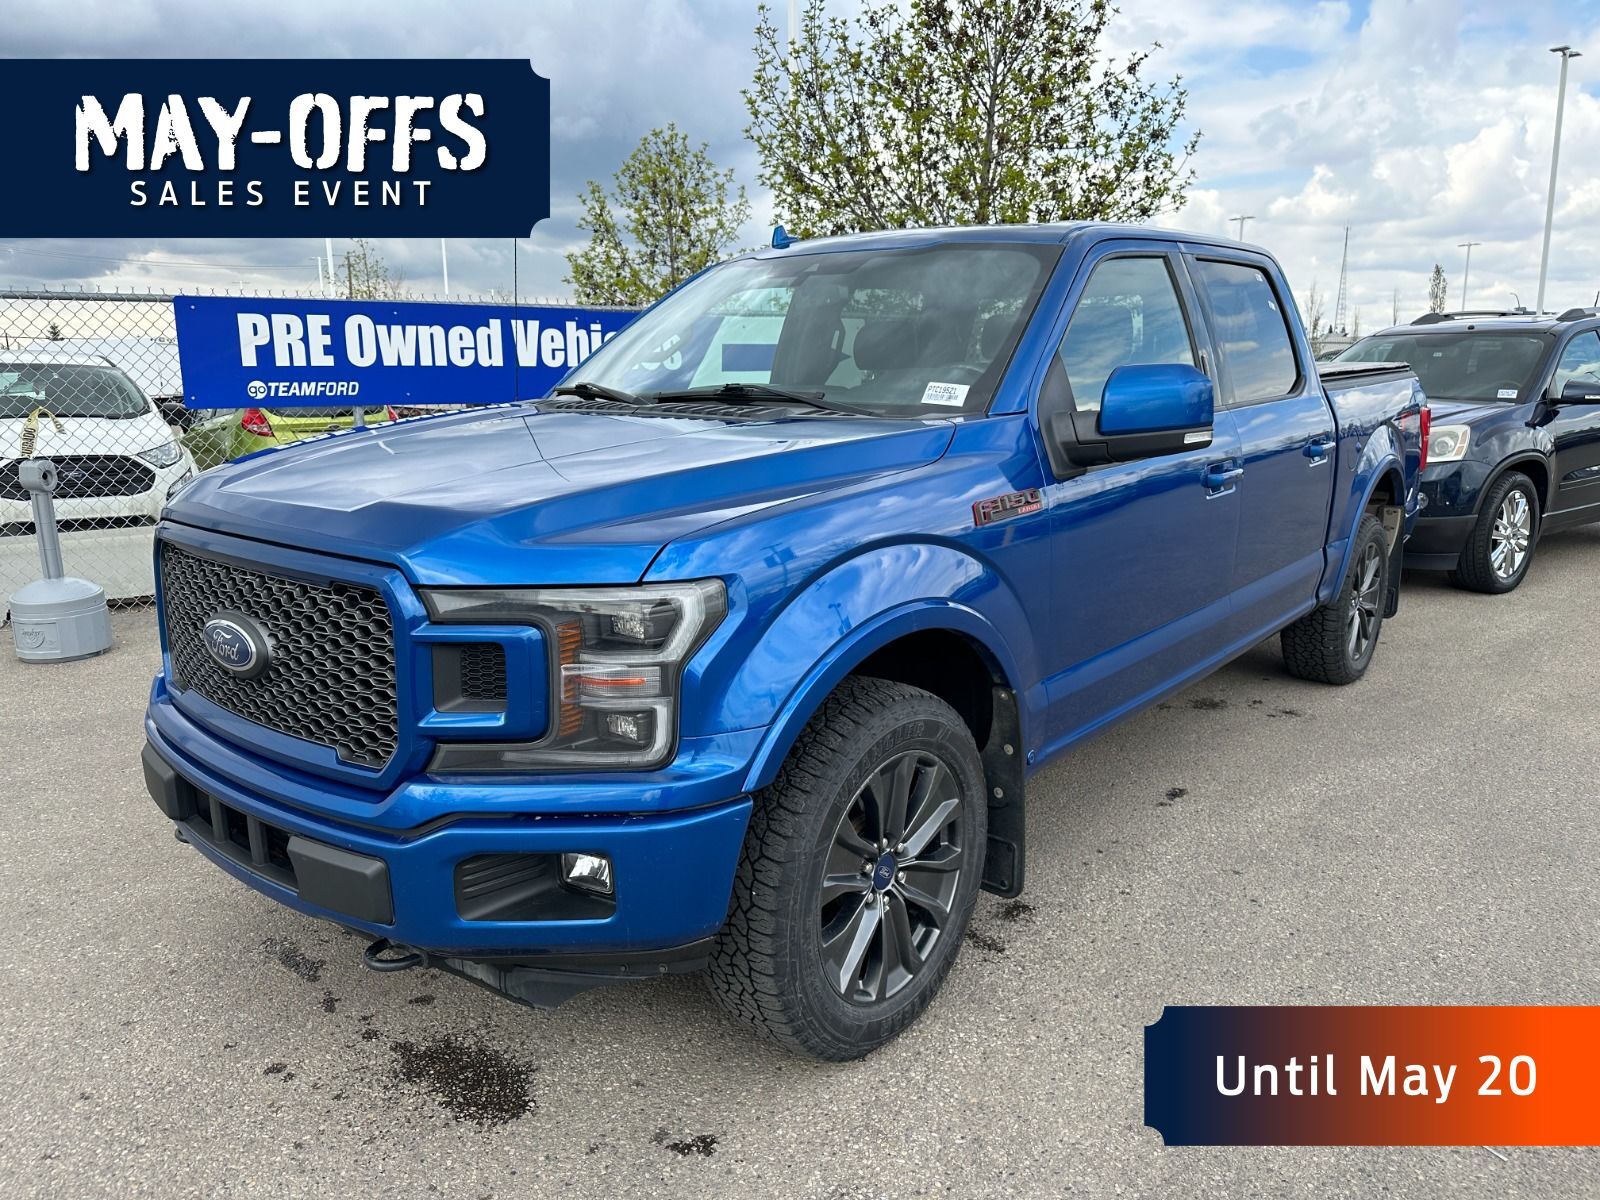 2018 Ford F-150 3.5L V6 ECOBOOST ENG, TWIN MOONROOF, LARIAT SPECIA